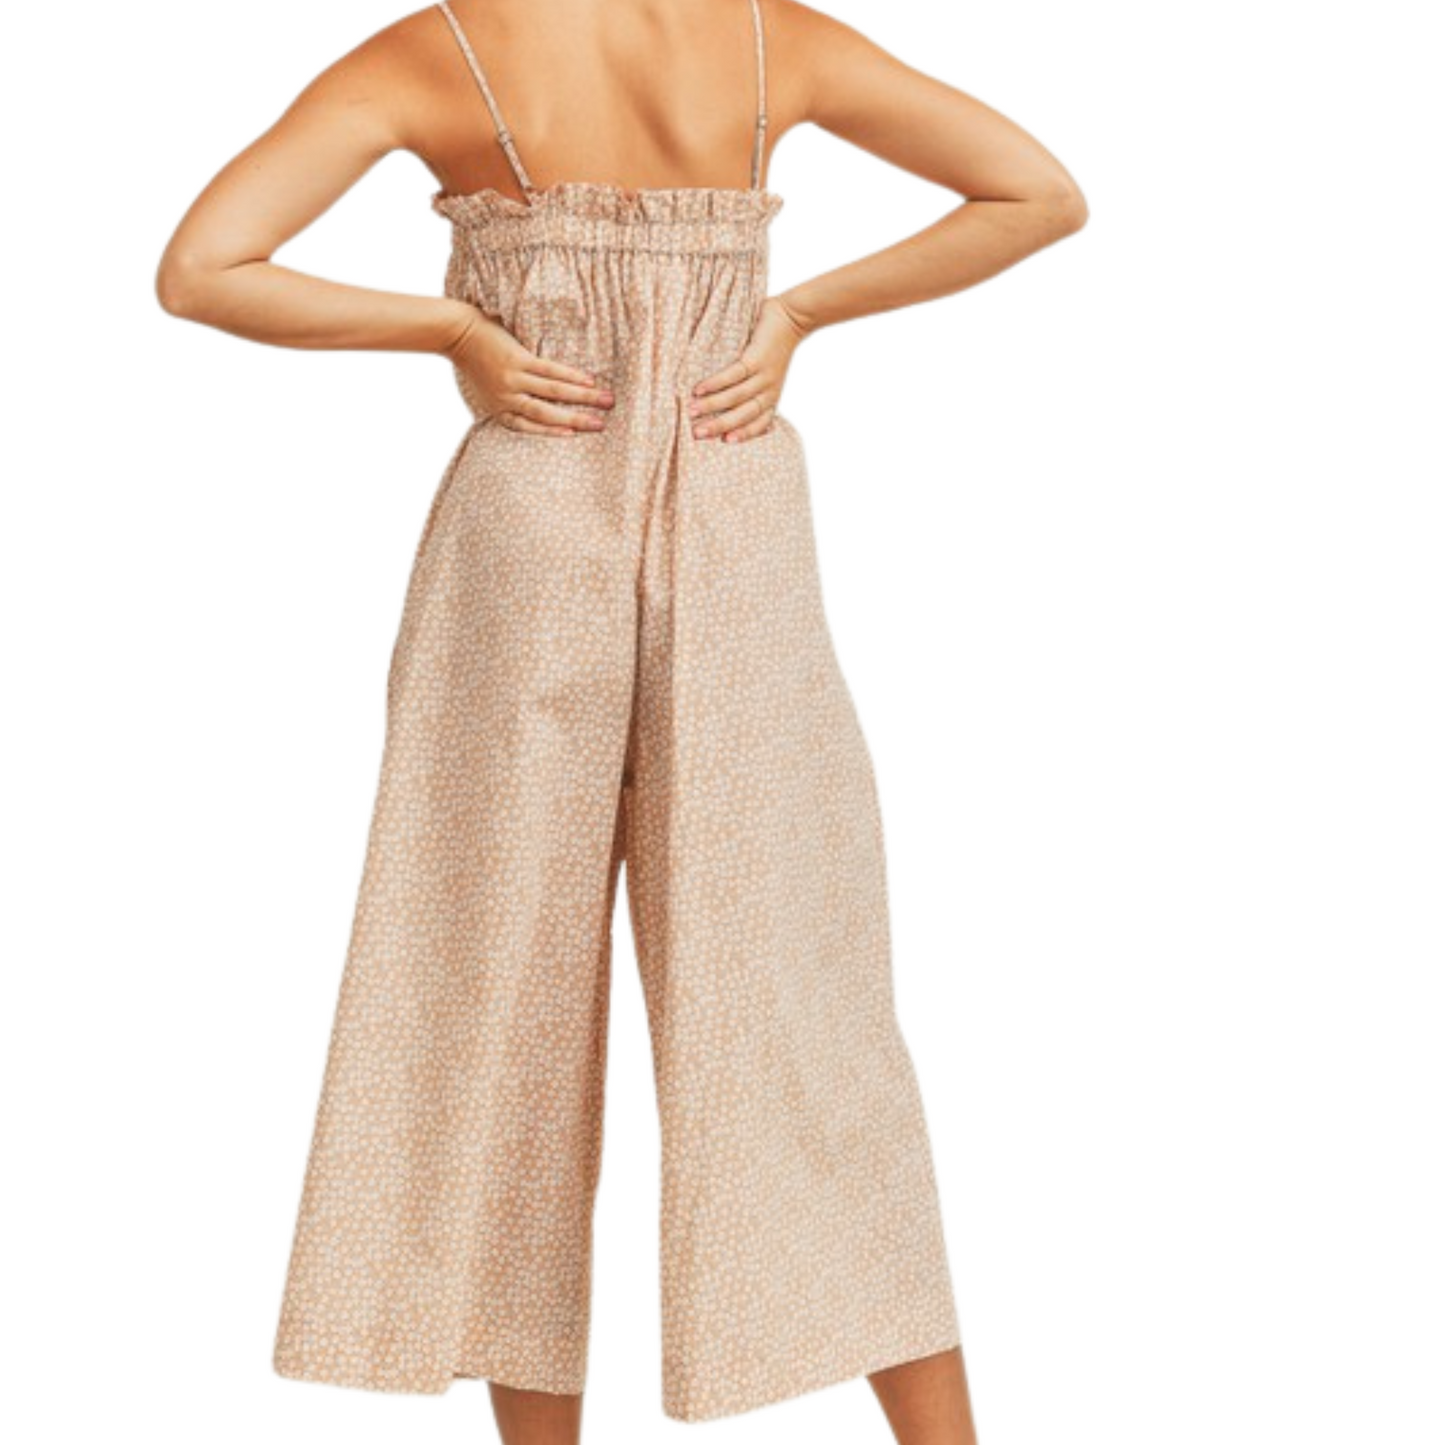 Peach floral jumpsuit with wide leg pants and pockets, worn by a woman from the back.